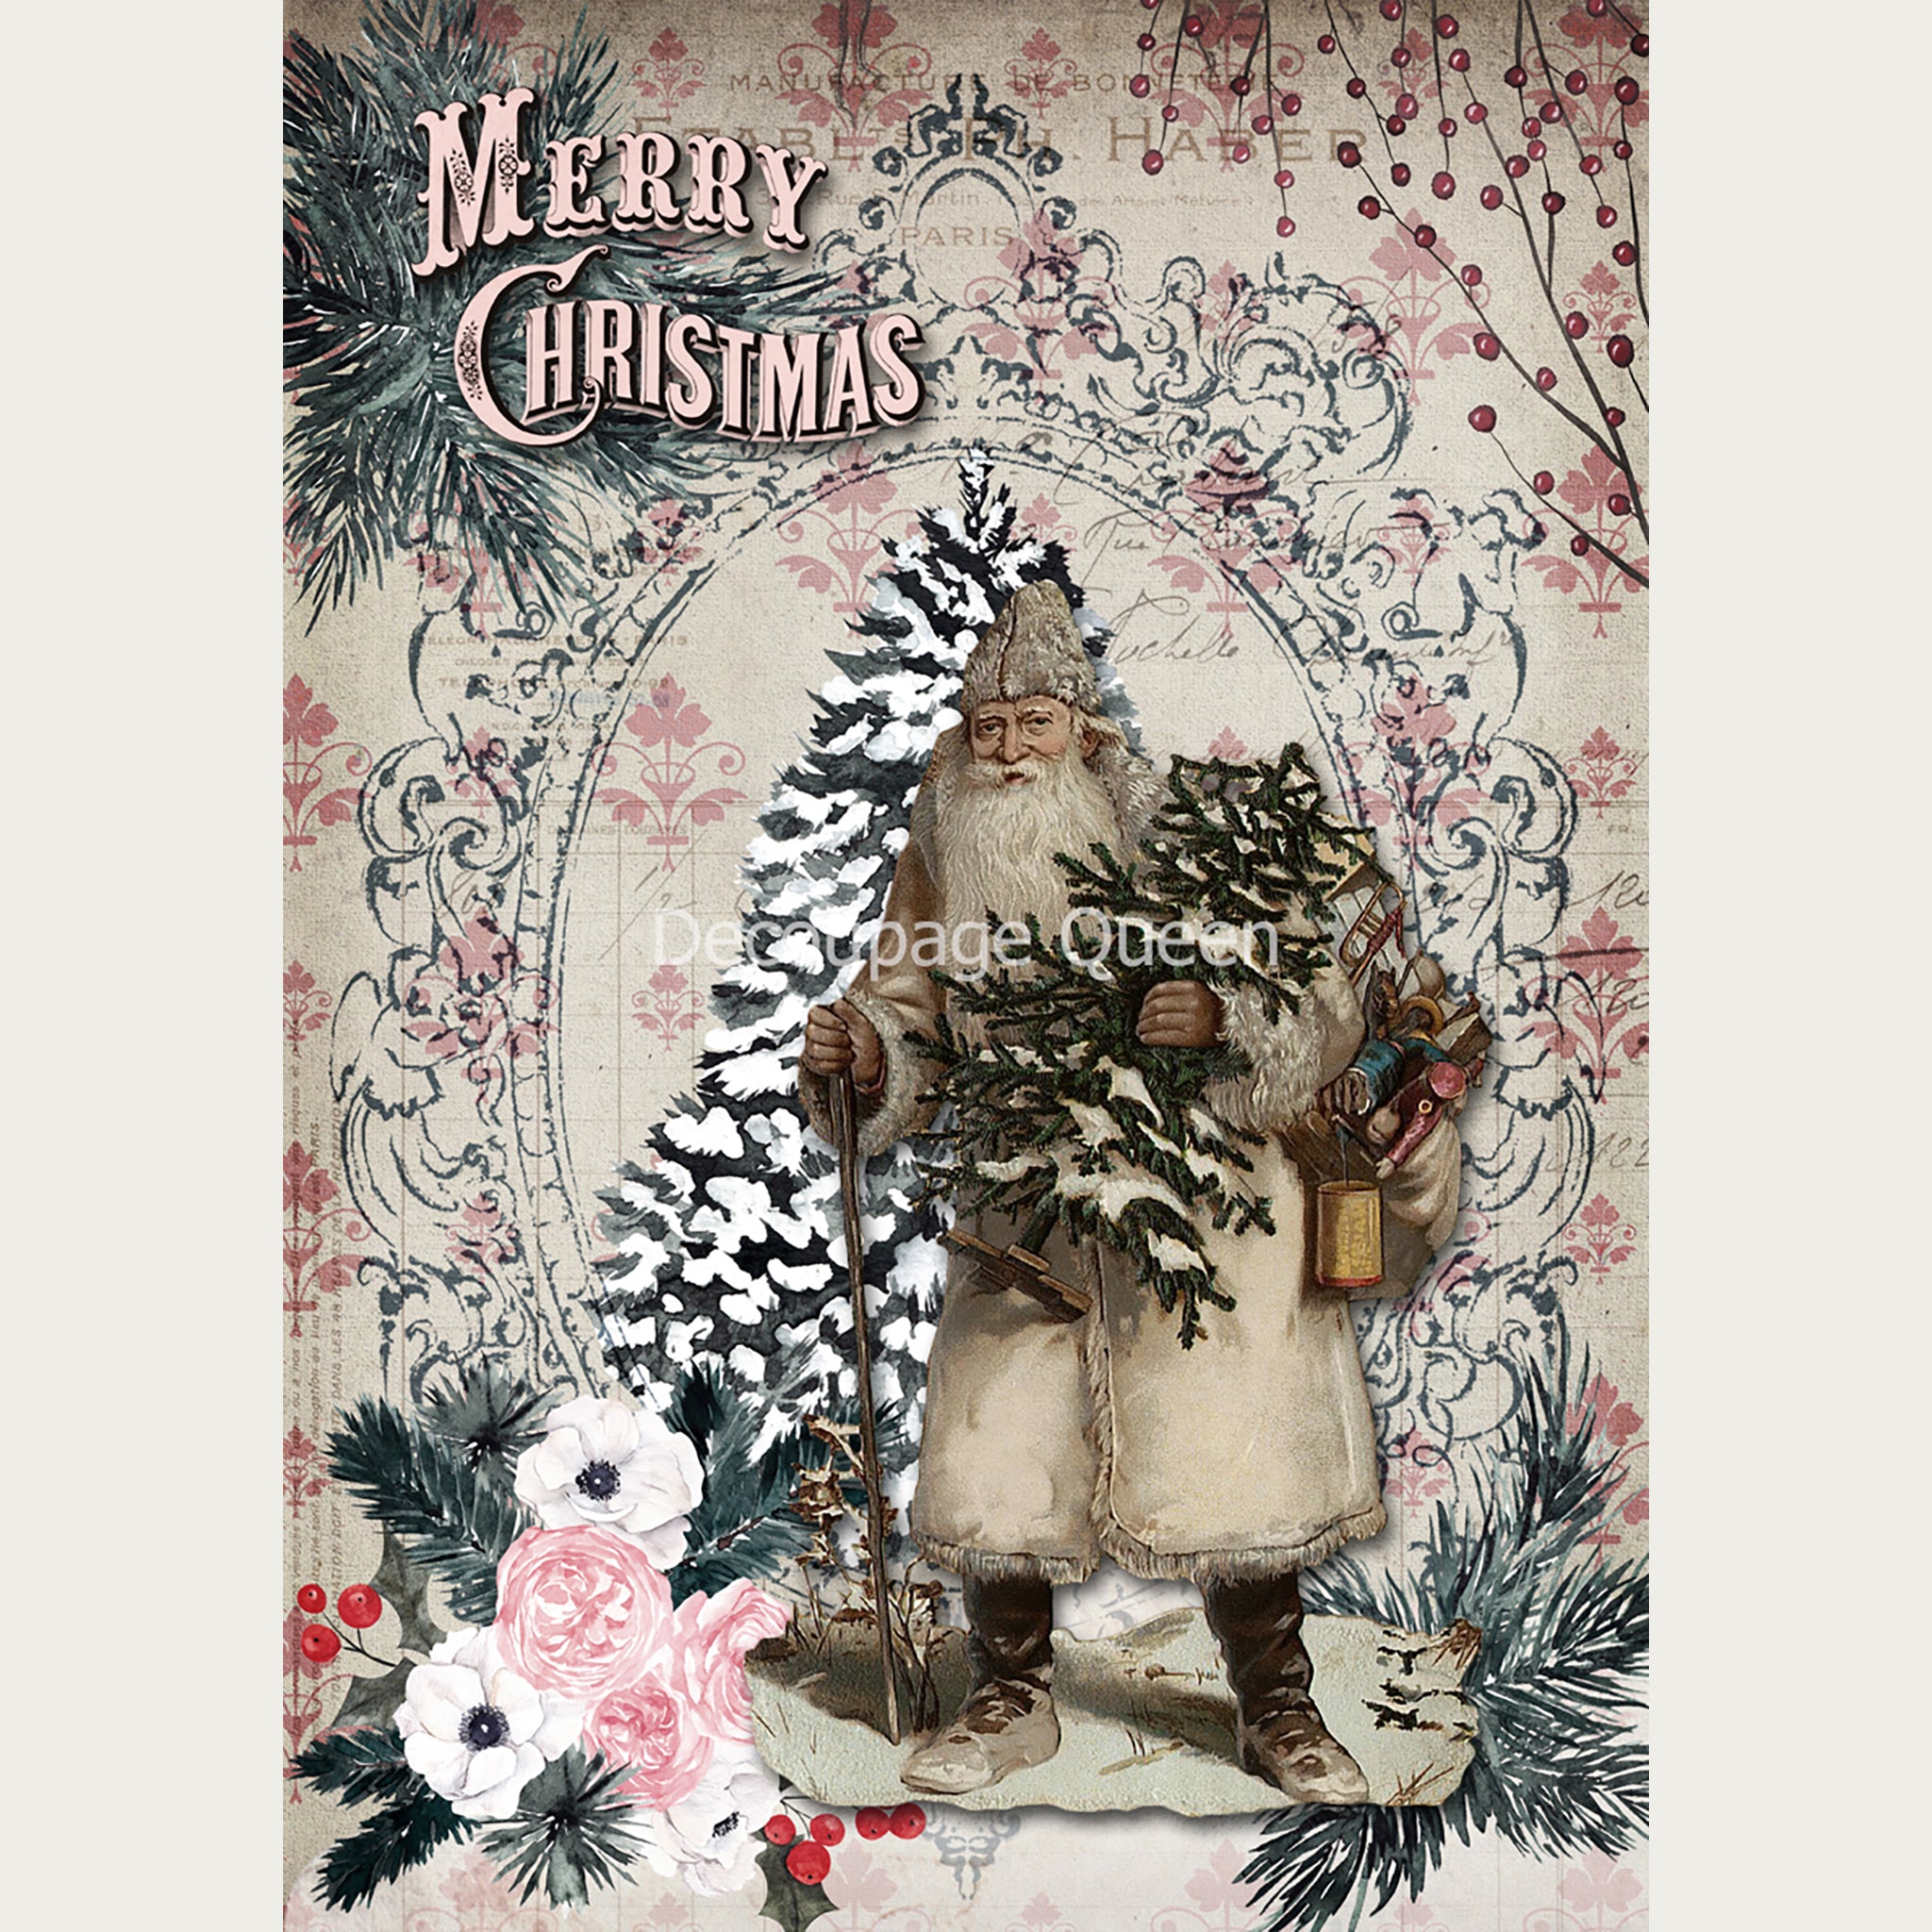 A3 rice paper design of a vintage Santa on a background with a snow covered pine tree and vintage floral wallpaper design.  White borders are on the sides.